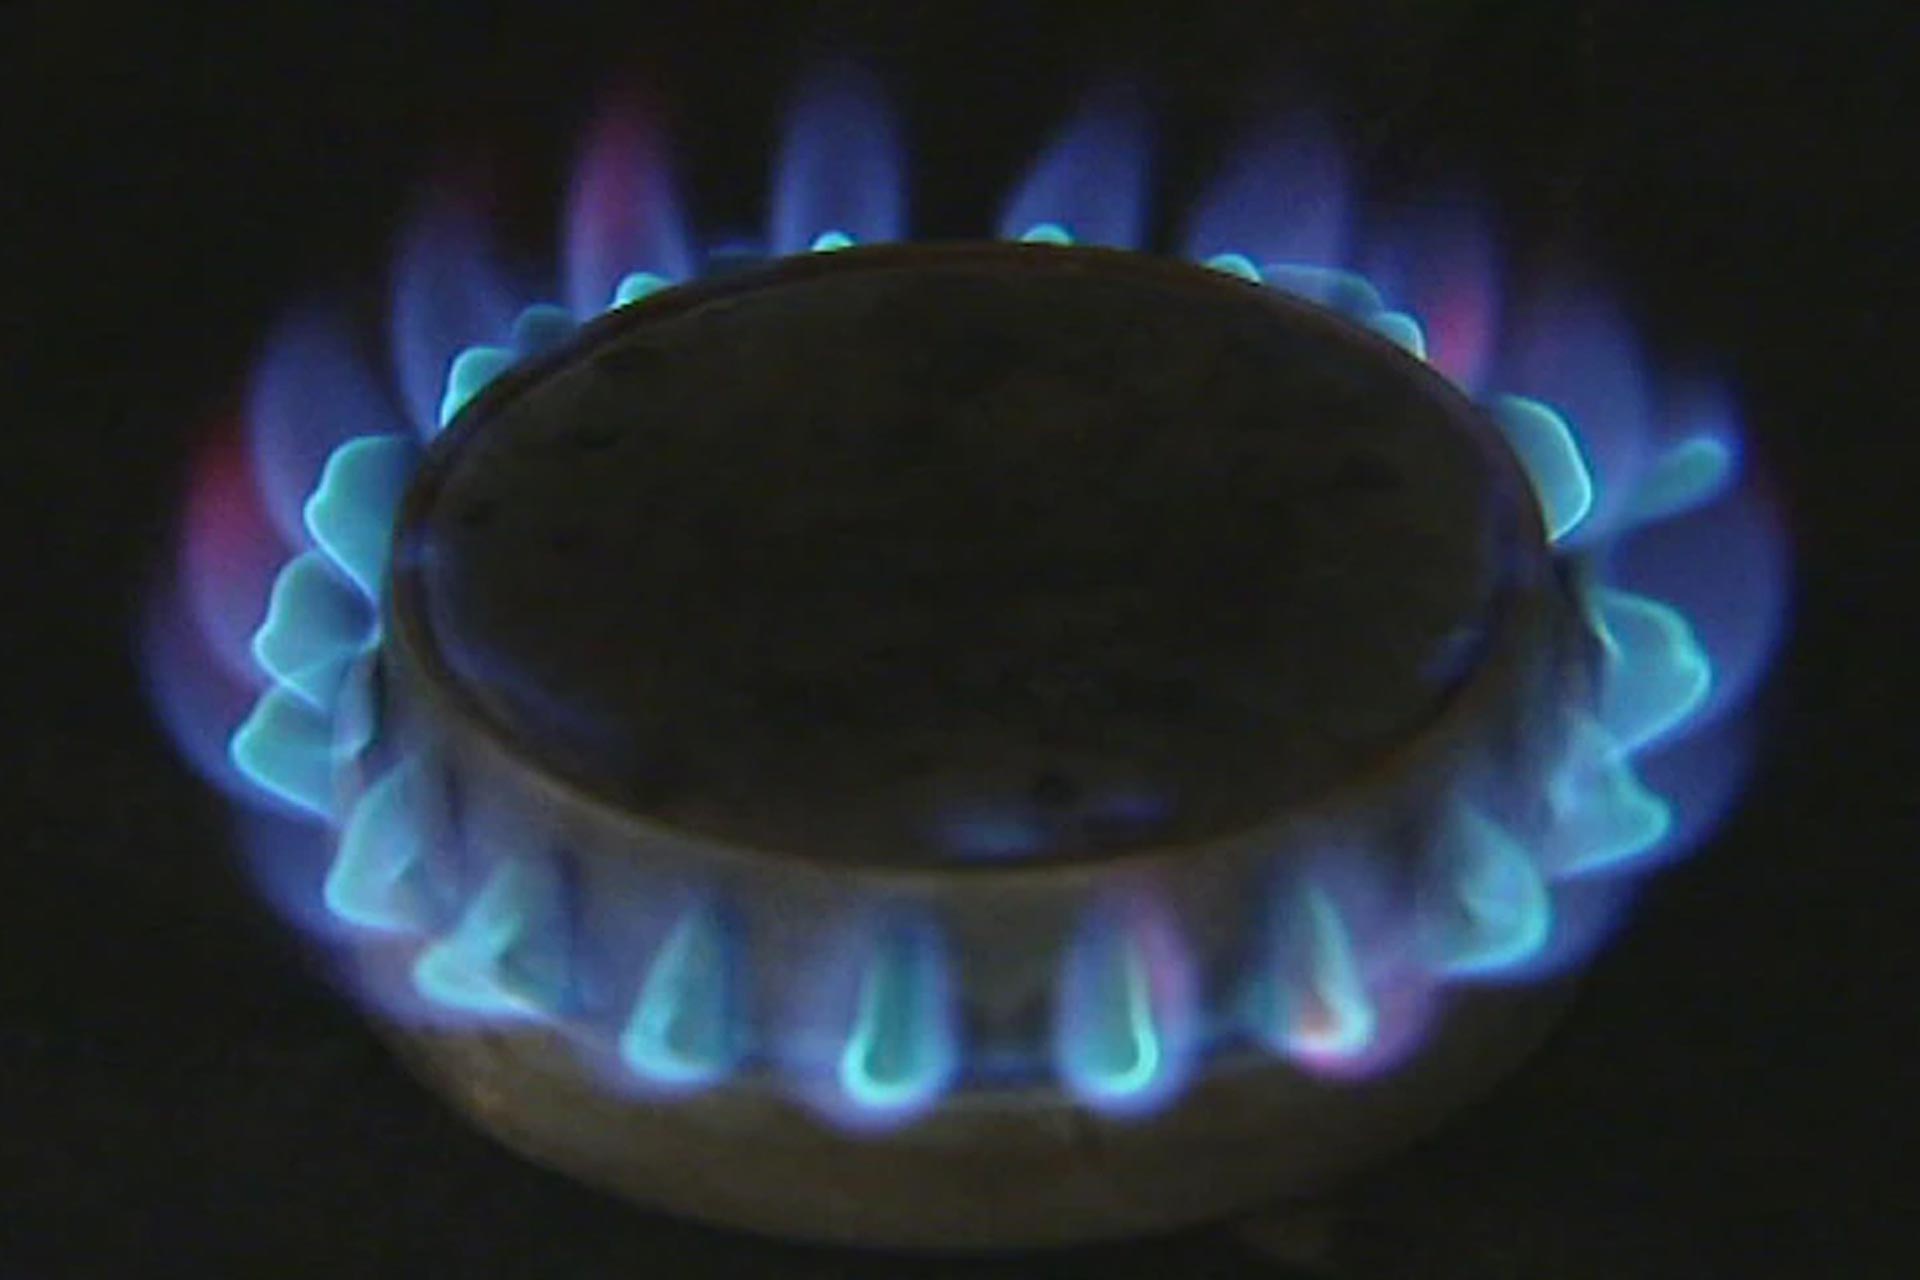 Gas outlook ‘concerning’ with government urged to act to alleviate worsening ‘energy security risk’